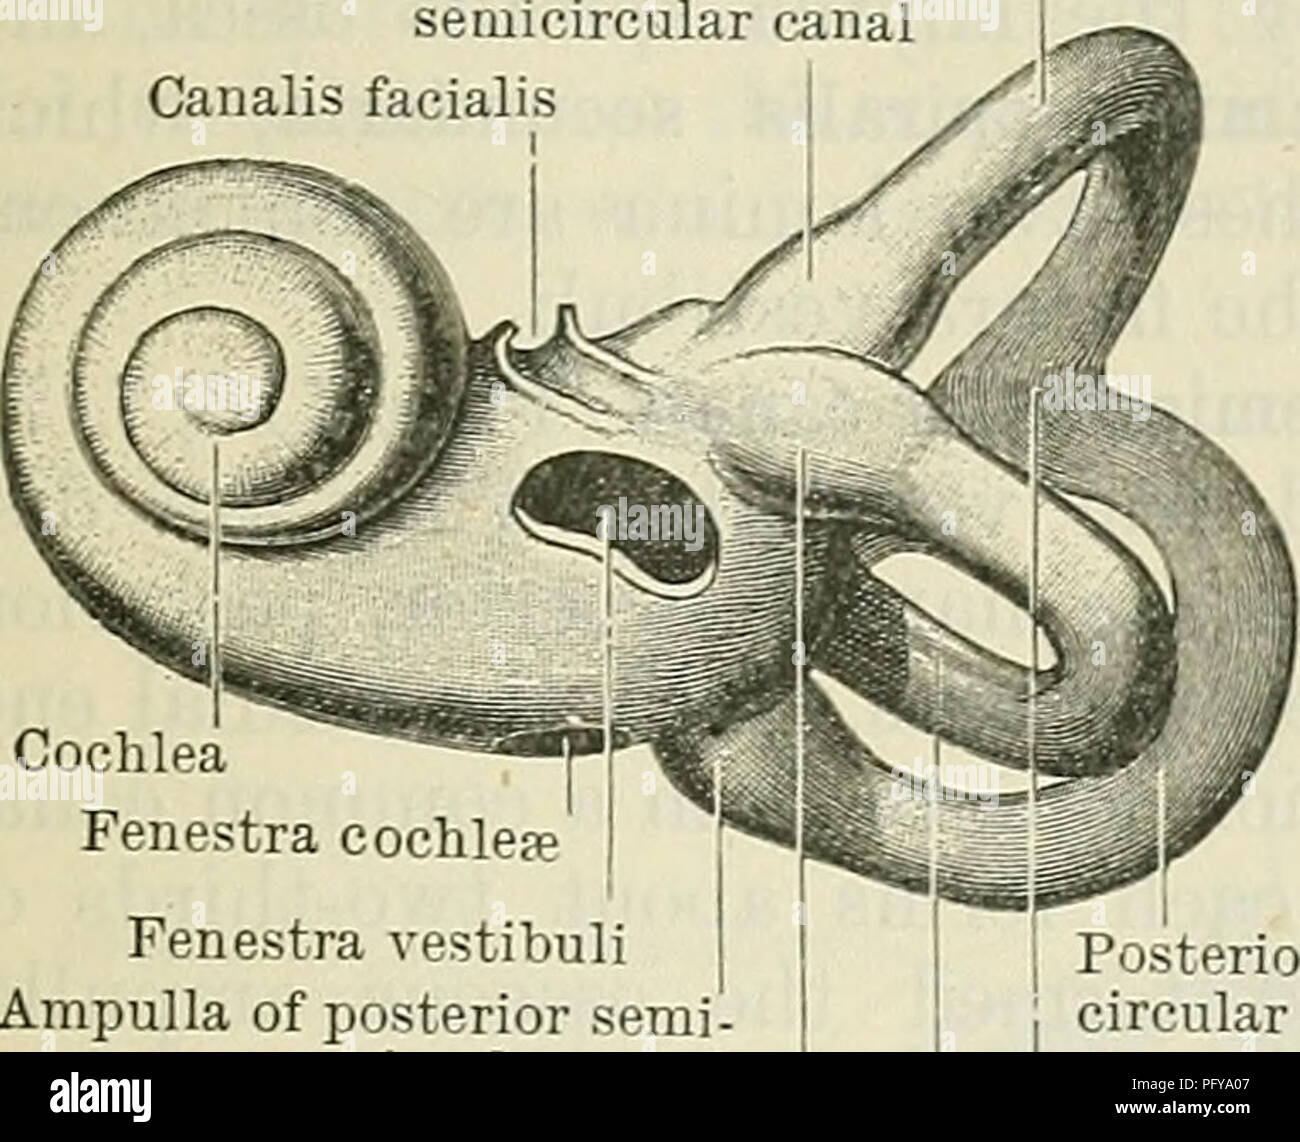 . Cunningham's Text-book of anatomy. Anatomy. OSSEOUS LABYBINTH. 84J AUEIS INTEKNA. The internal ear or essential part of the organ of hearing is situated in the substance of the petrous part of the temporal bone, and consists of two sets of structures, viz.: (1) a series of passages hollowed out of the bone and constituting the osseous labyrinth; these are continuous with each other, and are named Superior semicircular canal Ampulla of superior sernicircular canal Canalis facialis. Kecessus ellipticus Crista vestibuli Recessus spha?ricus Cochlea Fenestra cochlea; Fenestra vestibuli Ampulla of Stock Photo